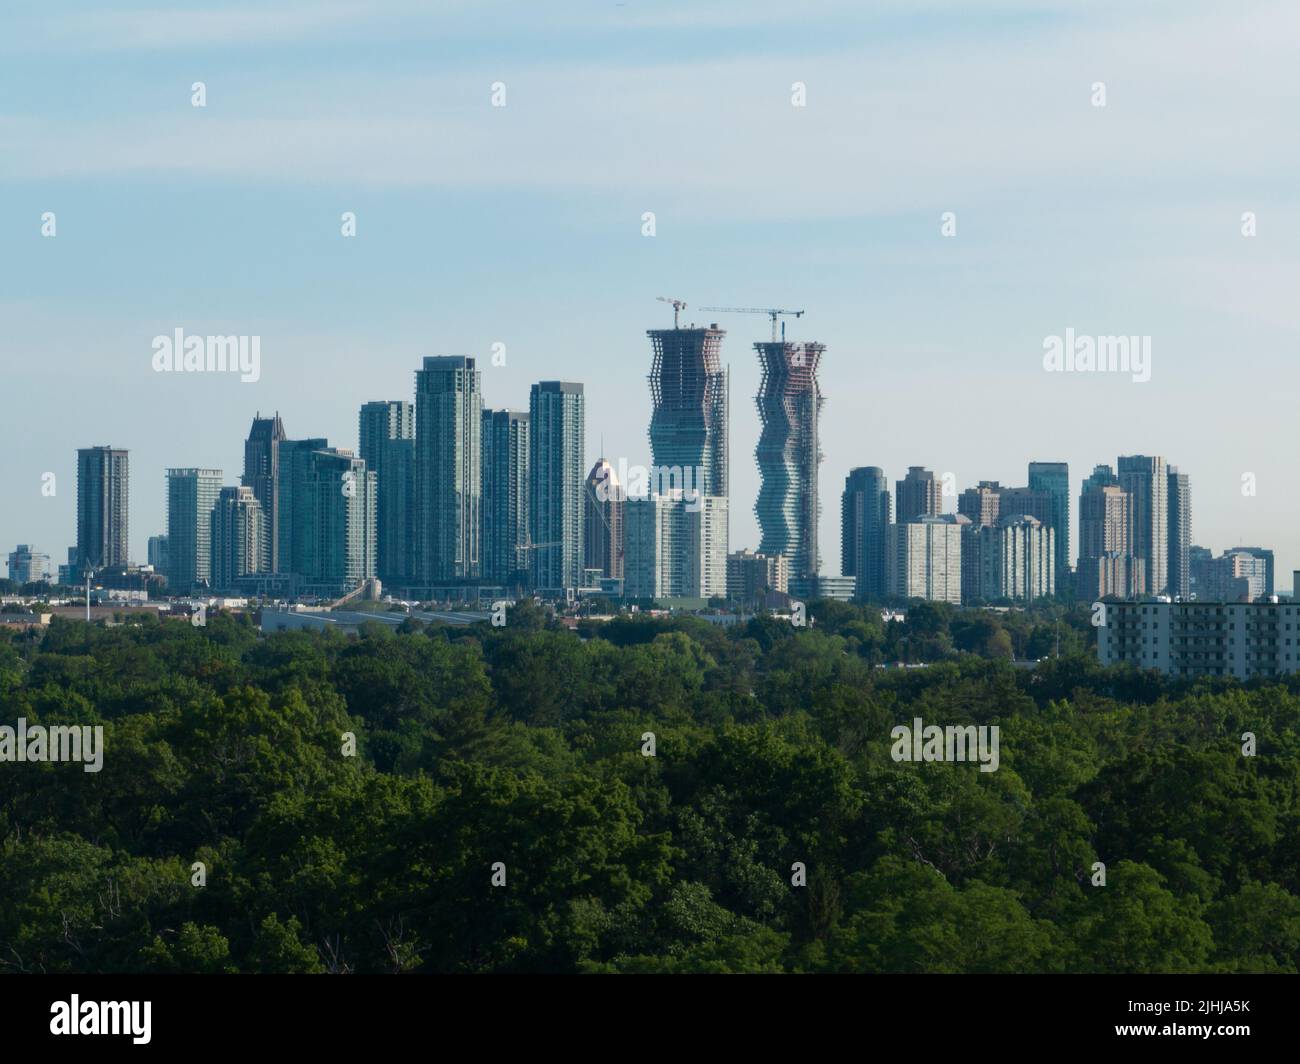 A modern cityscape skyline is seen on the horizon of a sunny day. New buildings and condos are under construction. Stock Photo